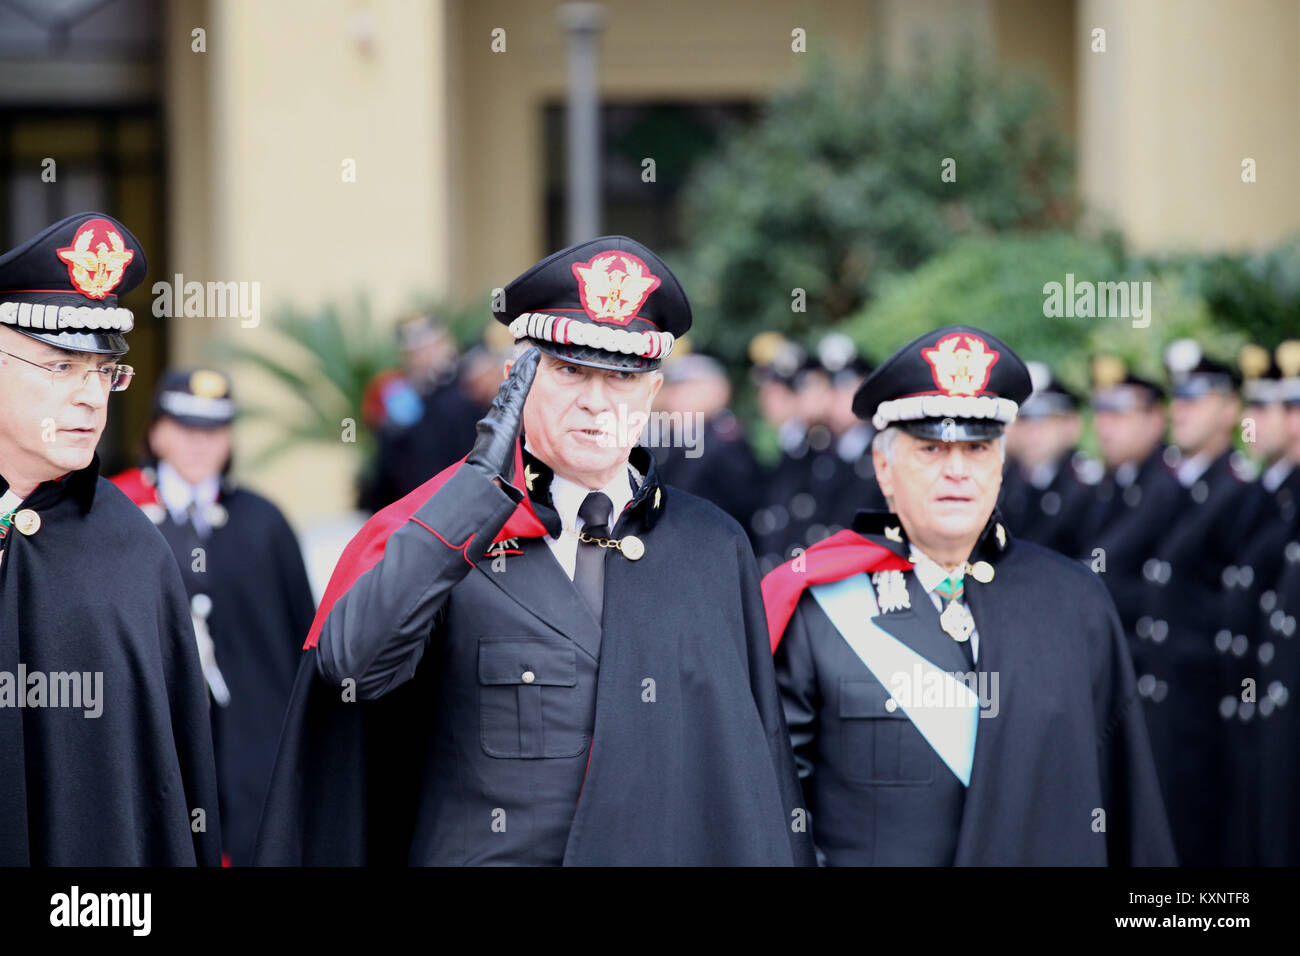 January 11, 2018 - the general commander of the firearms of the Carabinieri Tullio Del Sette, together with the Generali Vittori Tommasone and Giovanni Nistri during the change of guard at the top of the commandos.Naples, Italy - Naples: change at the top of the ''Ogaden'' Carabinieri Inter-regional Command.This morning was held in Naples the ceremony of rotation of the Commander Carabinieri ''Ogaden''.At the General of the Army Corps Giovanni Nistri, Commander of the Summit from 6 April 2016, the paratroop Vittorio Tomasone takes over. General Nistri leaves, after 21 months, the Interregio Stock Photo